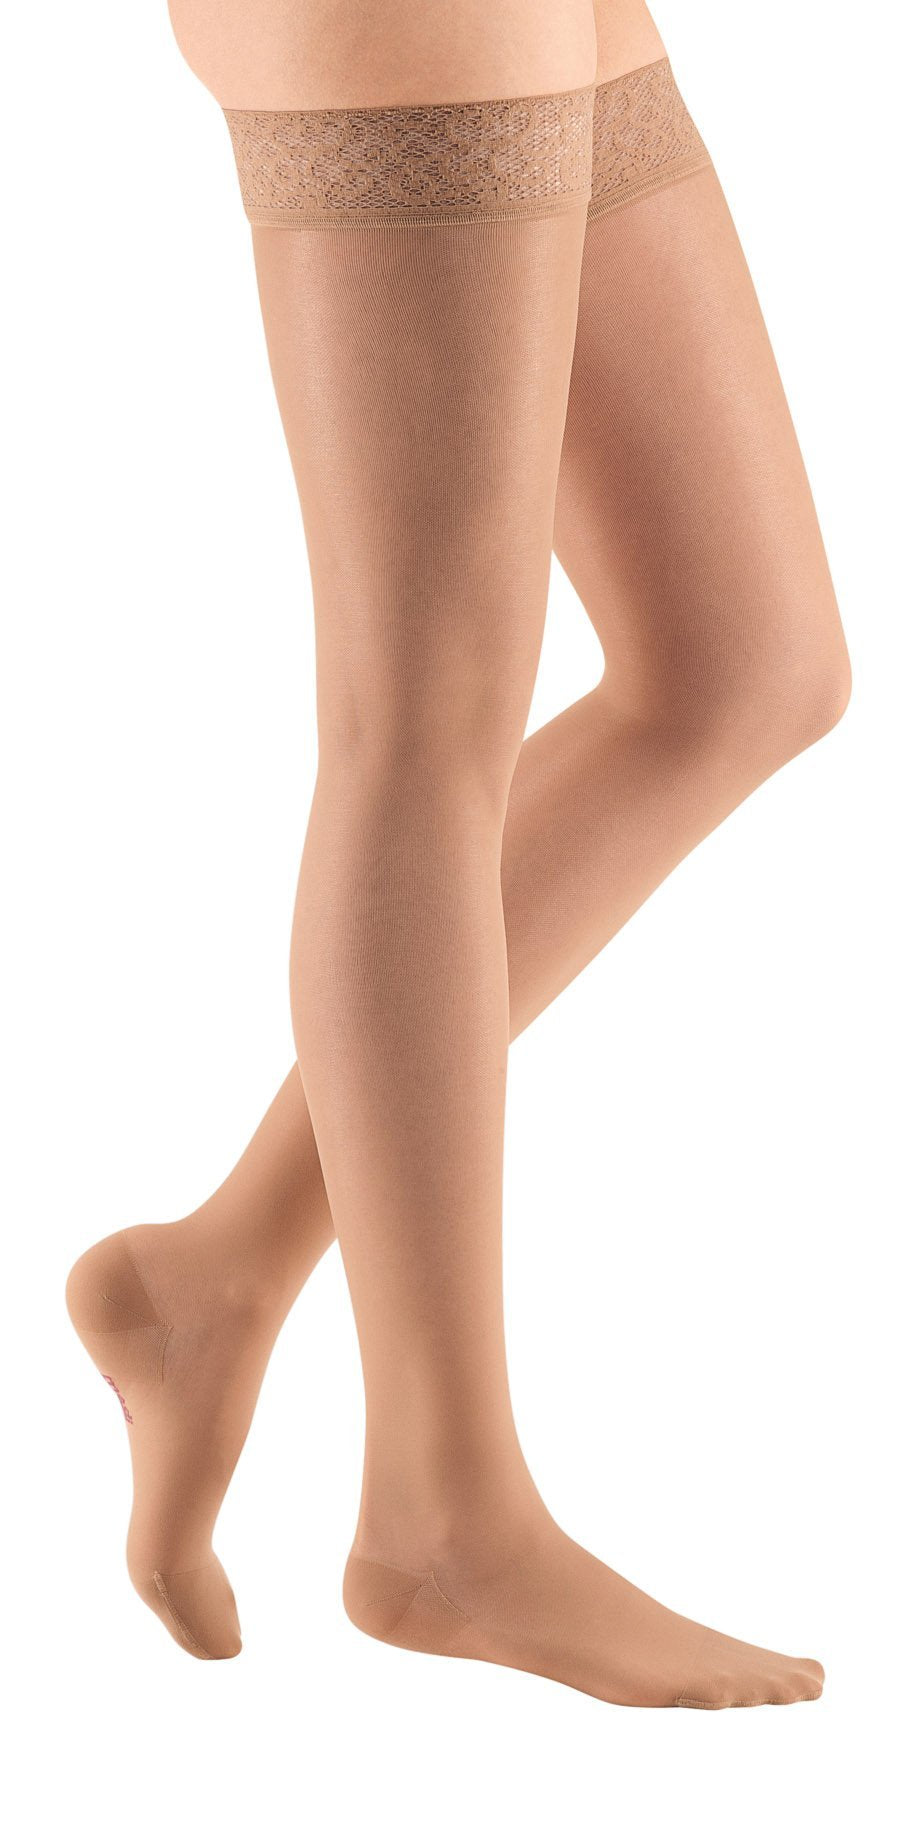 mediven sheer & soft, 8-15 mmHg, Thigh High with Lace Top-Band, Closed Toe